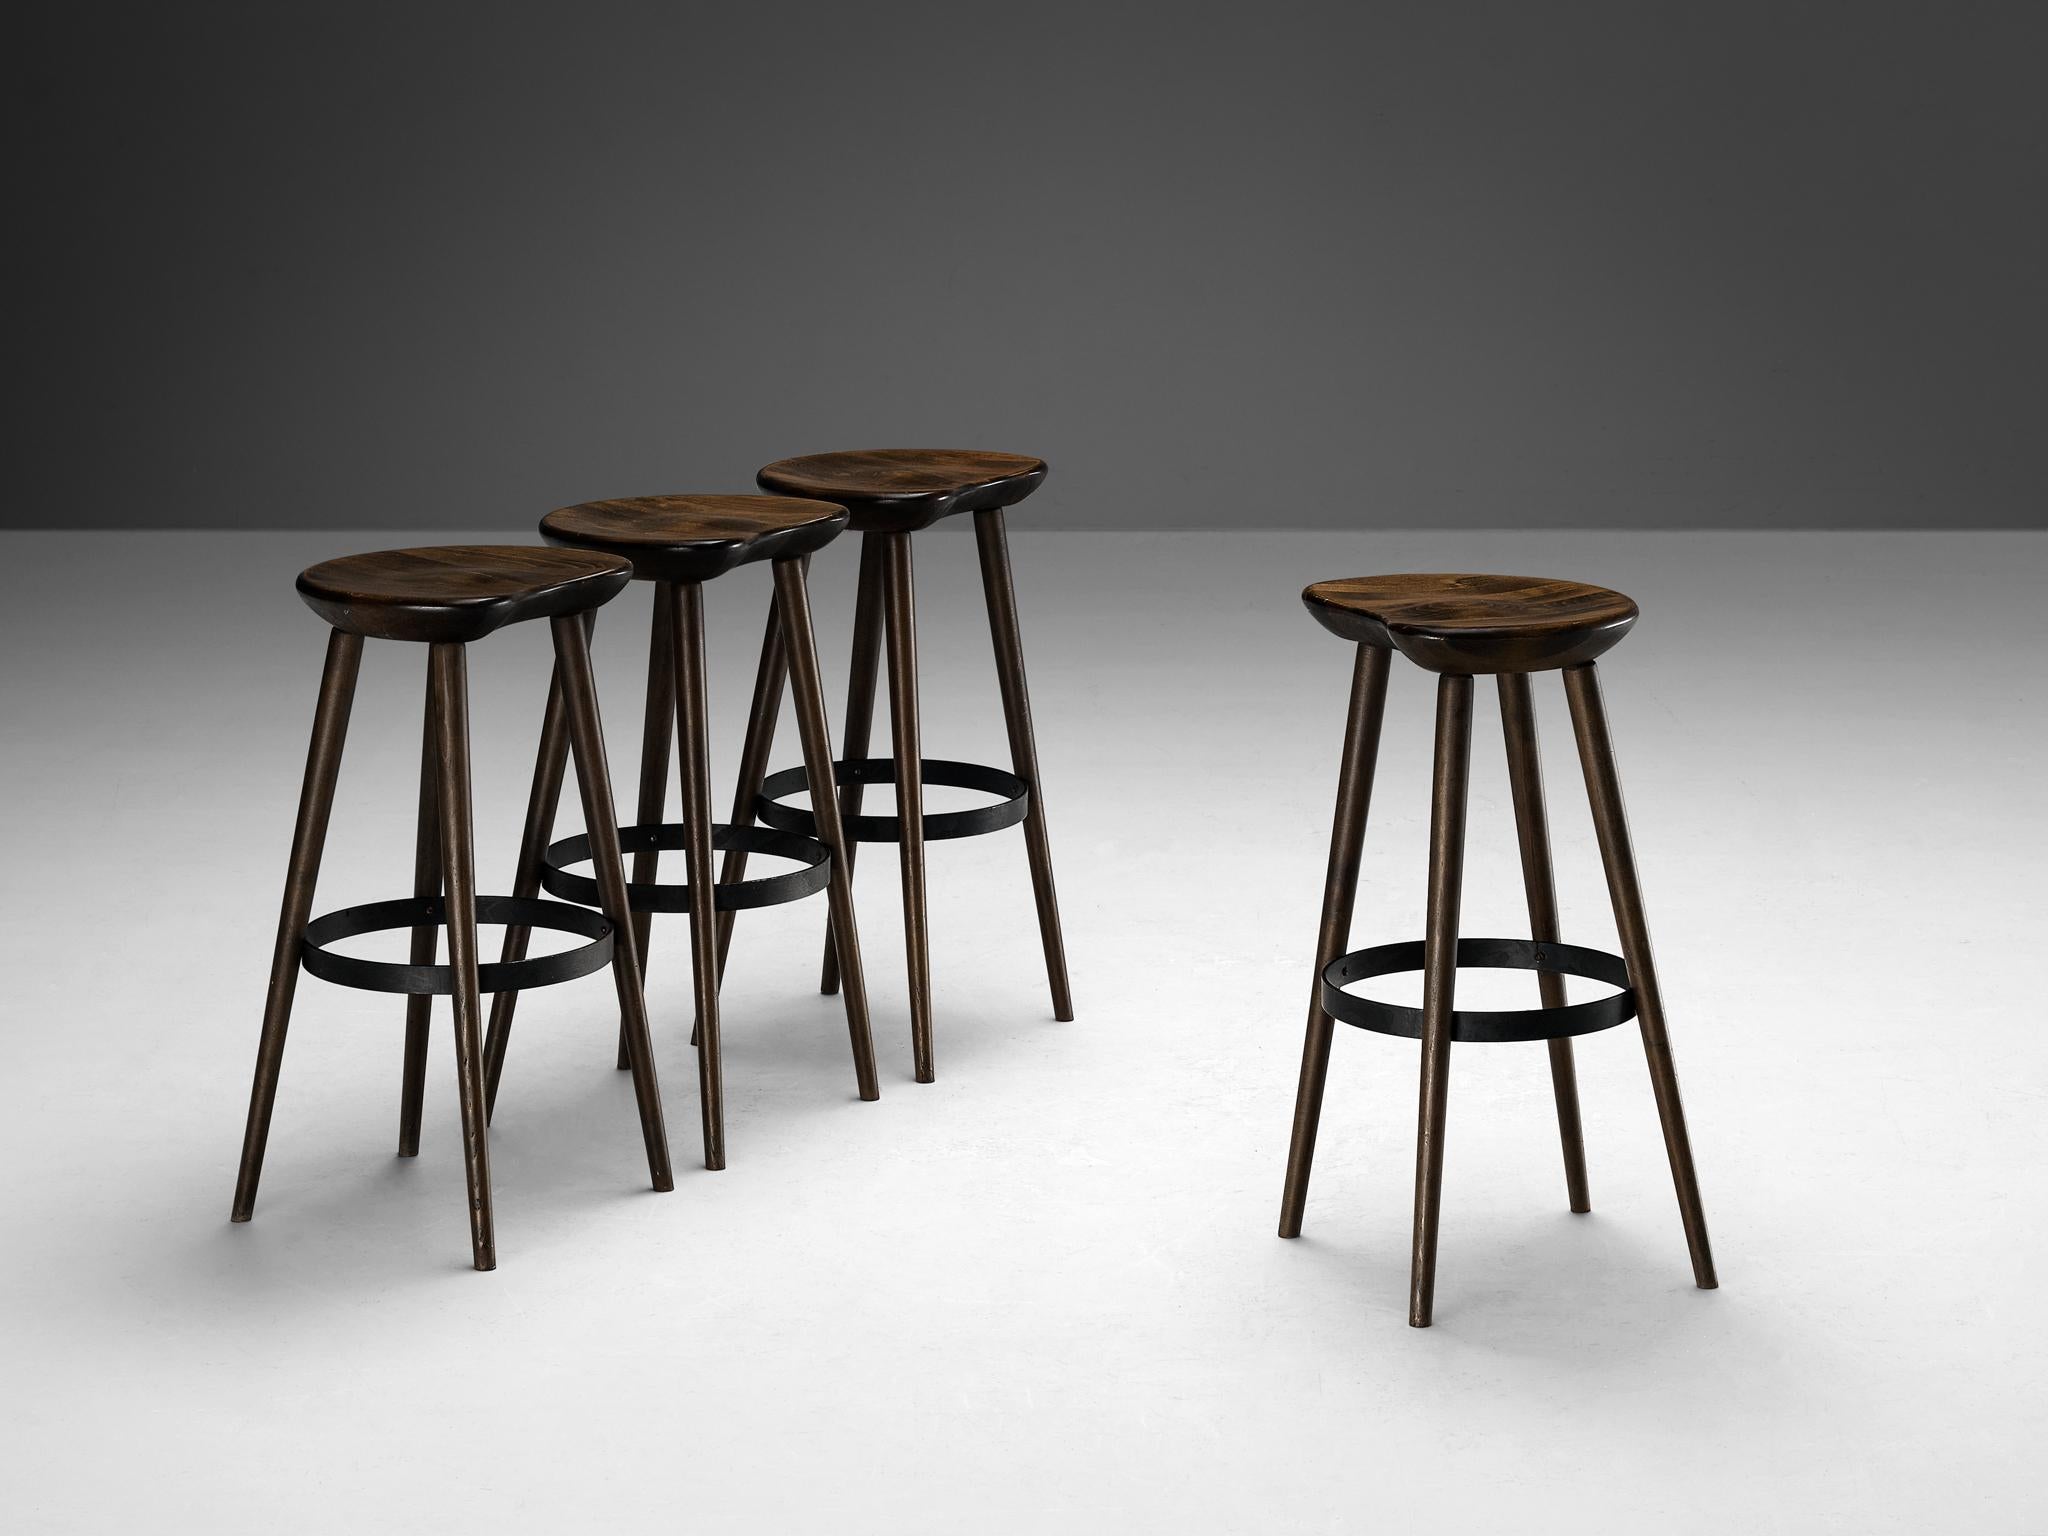 Brutalist bar stools, stained beech, Europe, 1970s

Exquisite and robust, these bar stools showcases a striking patina that is characteristic of the brutalist design prevalent in the 1970s. Crafted during this iconic era, these chairs feature seats